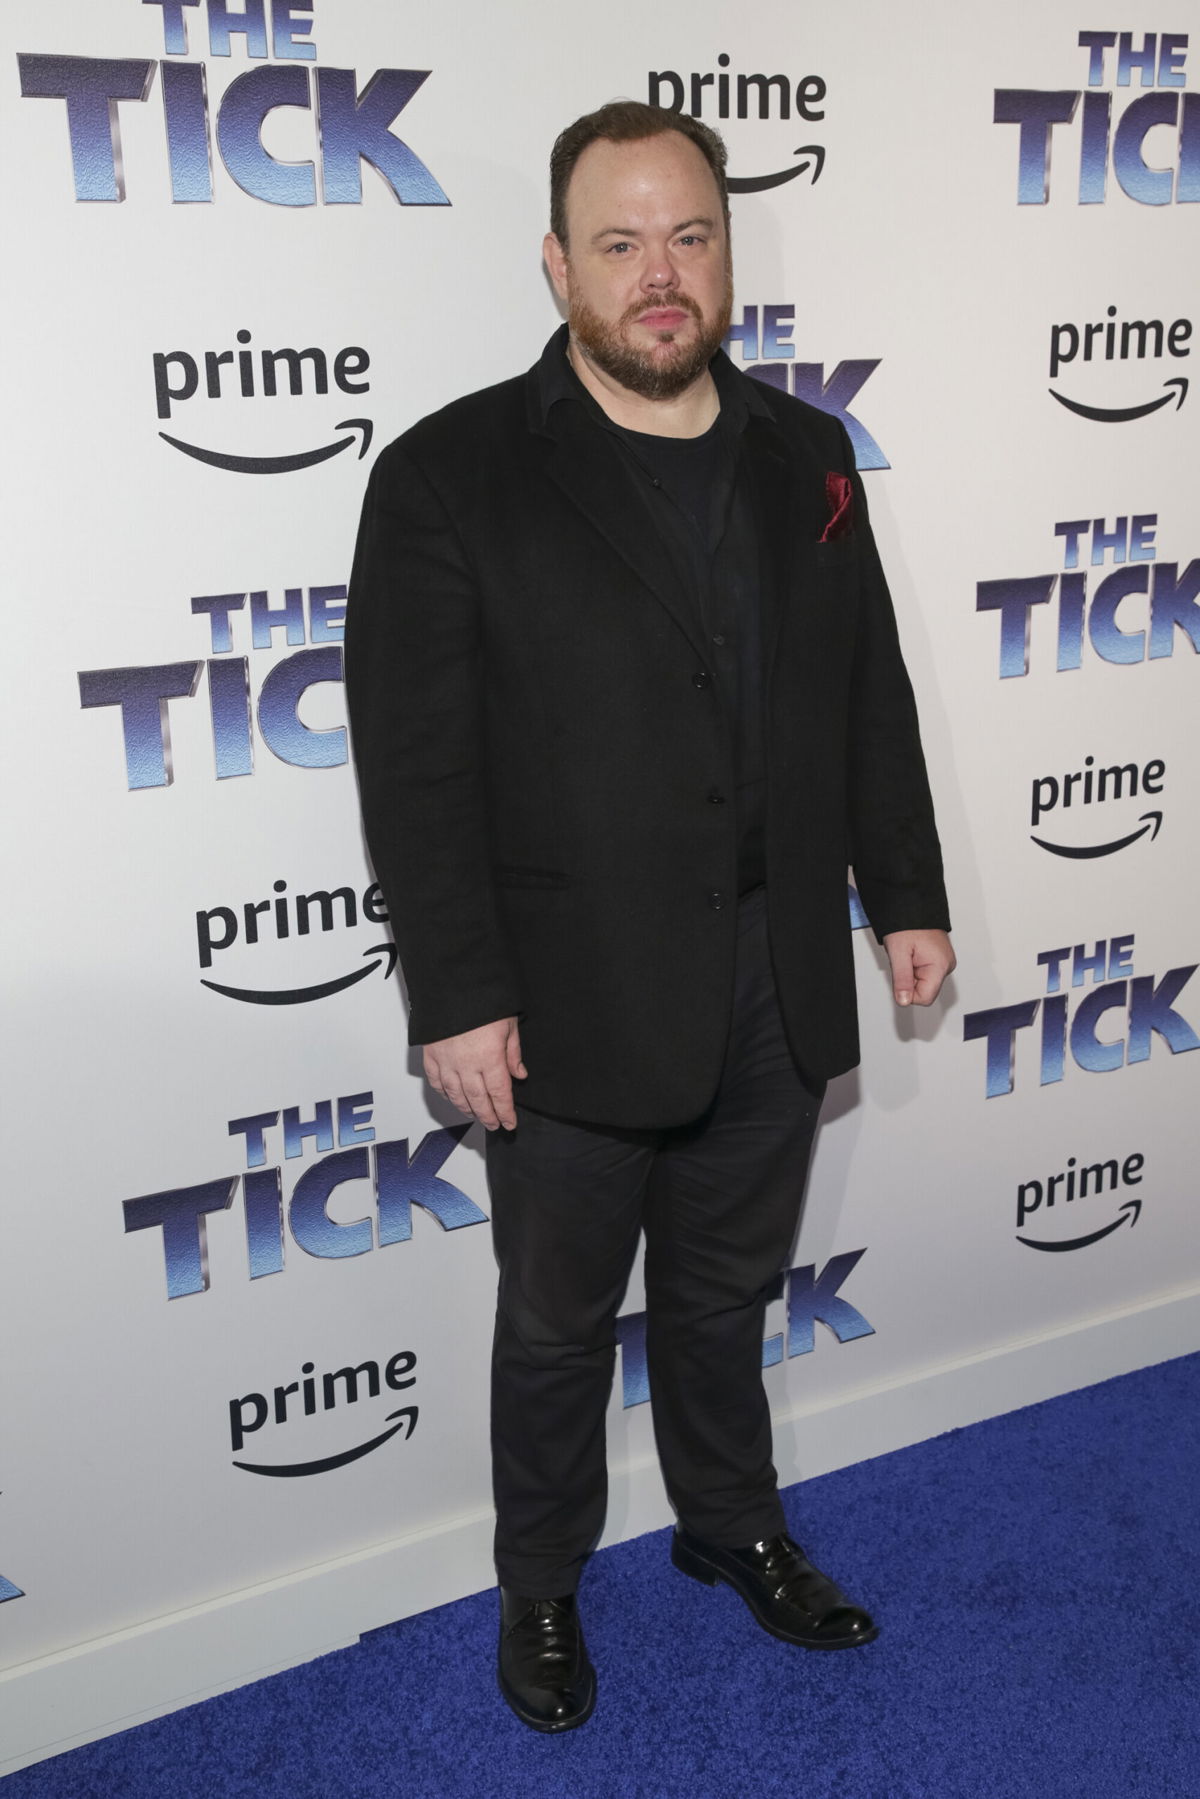 <i>Brent N. Clarke/Invision/AP</i><br/>Authorities in New York City are investigating a rape allegation against actor Devin Ratray